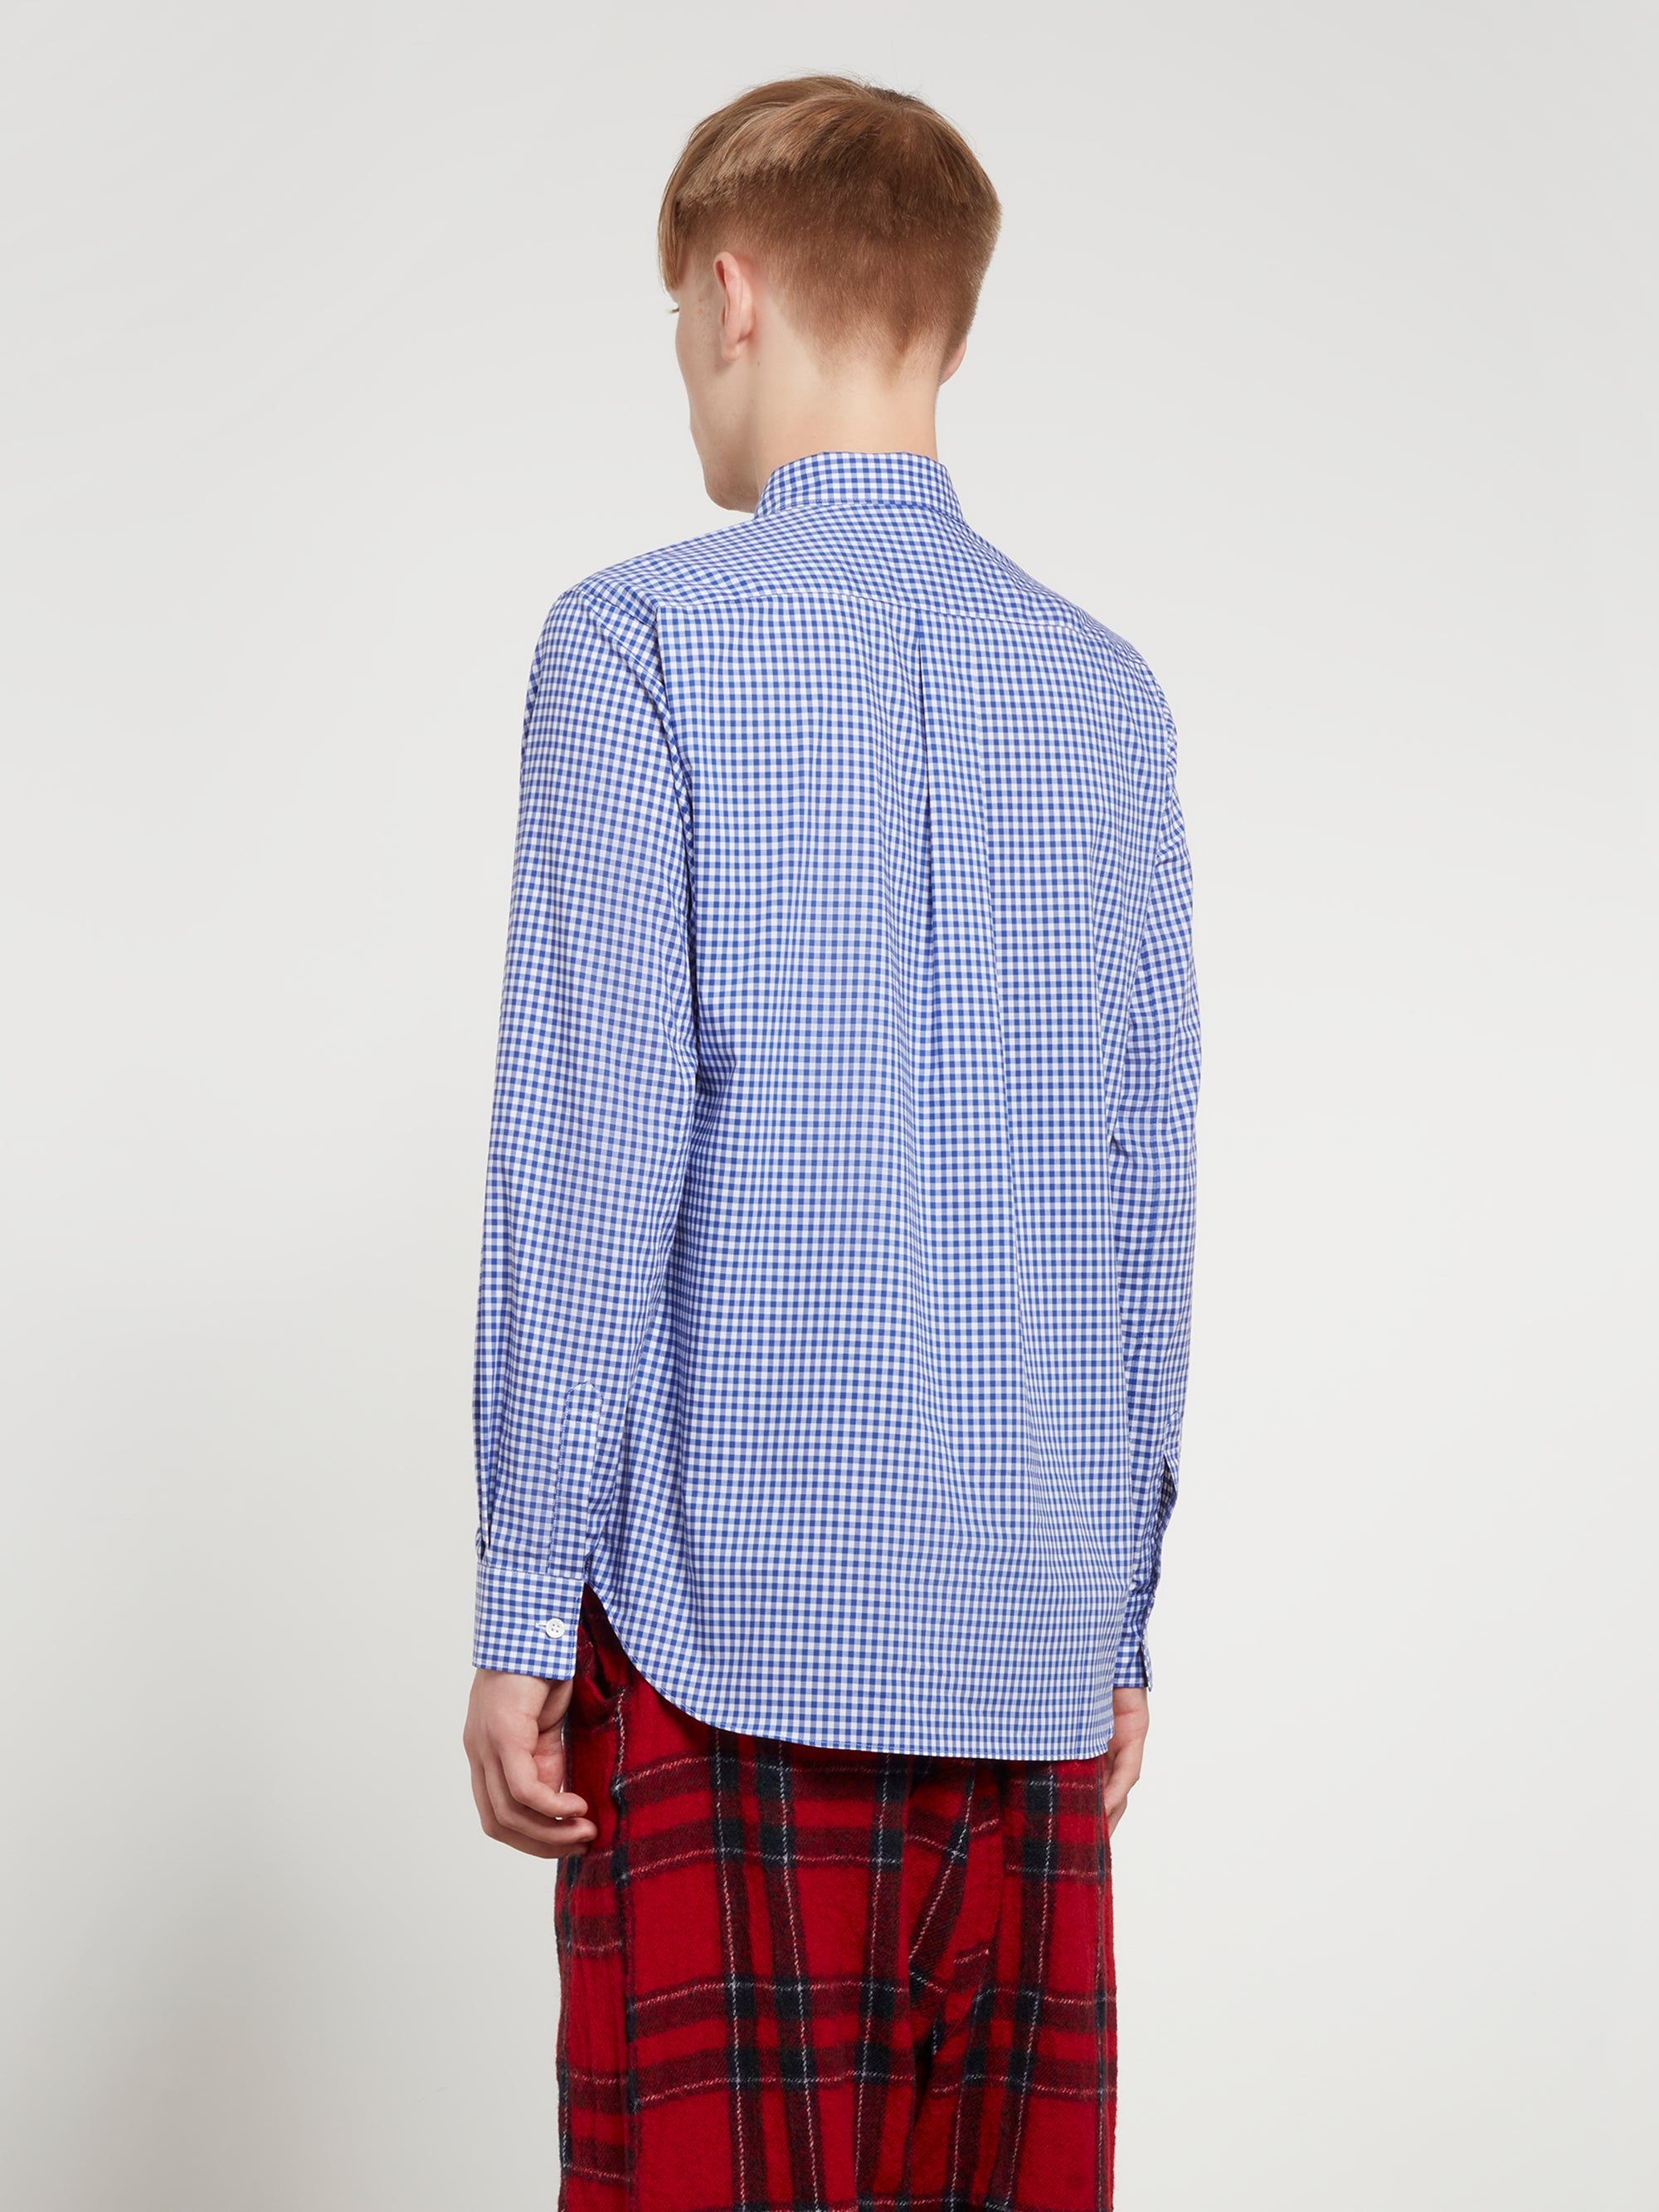 CDG Shirt Forever - Slim Fit Button-Down Checked Shirt - (Blue Gingham) view 3